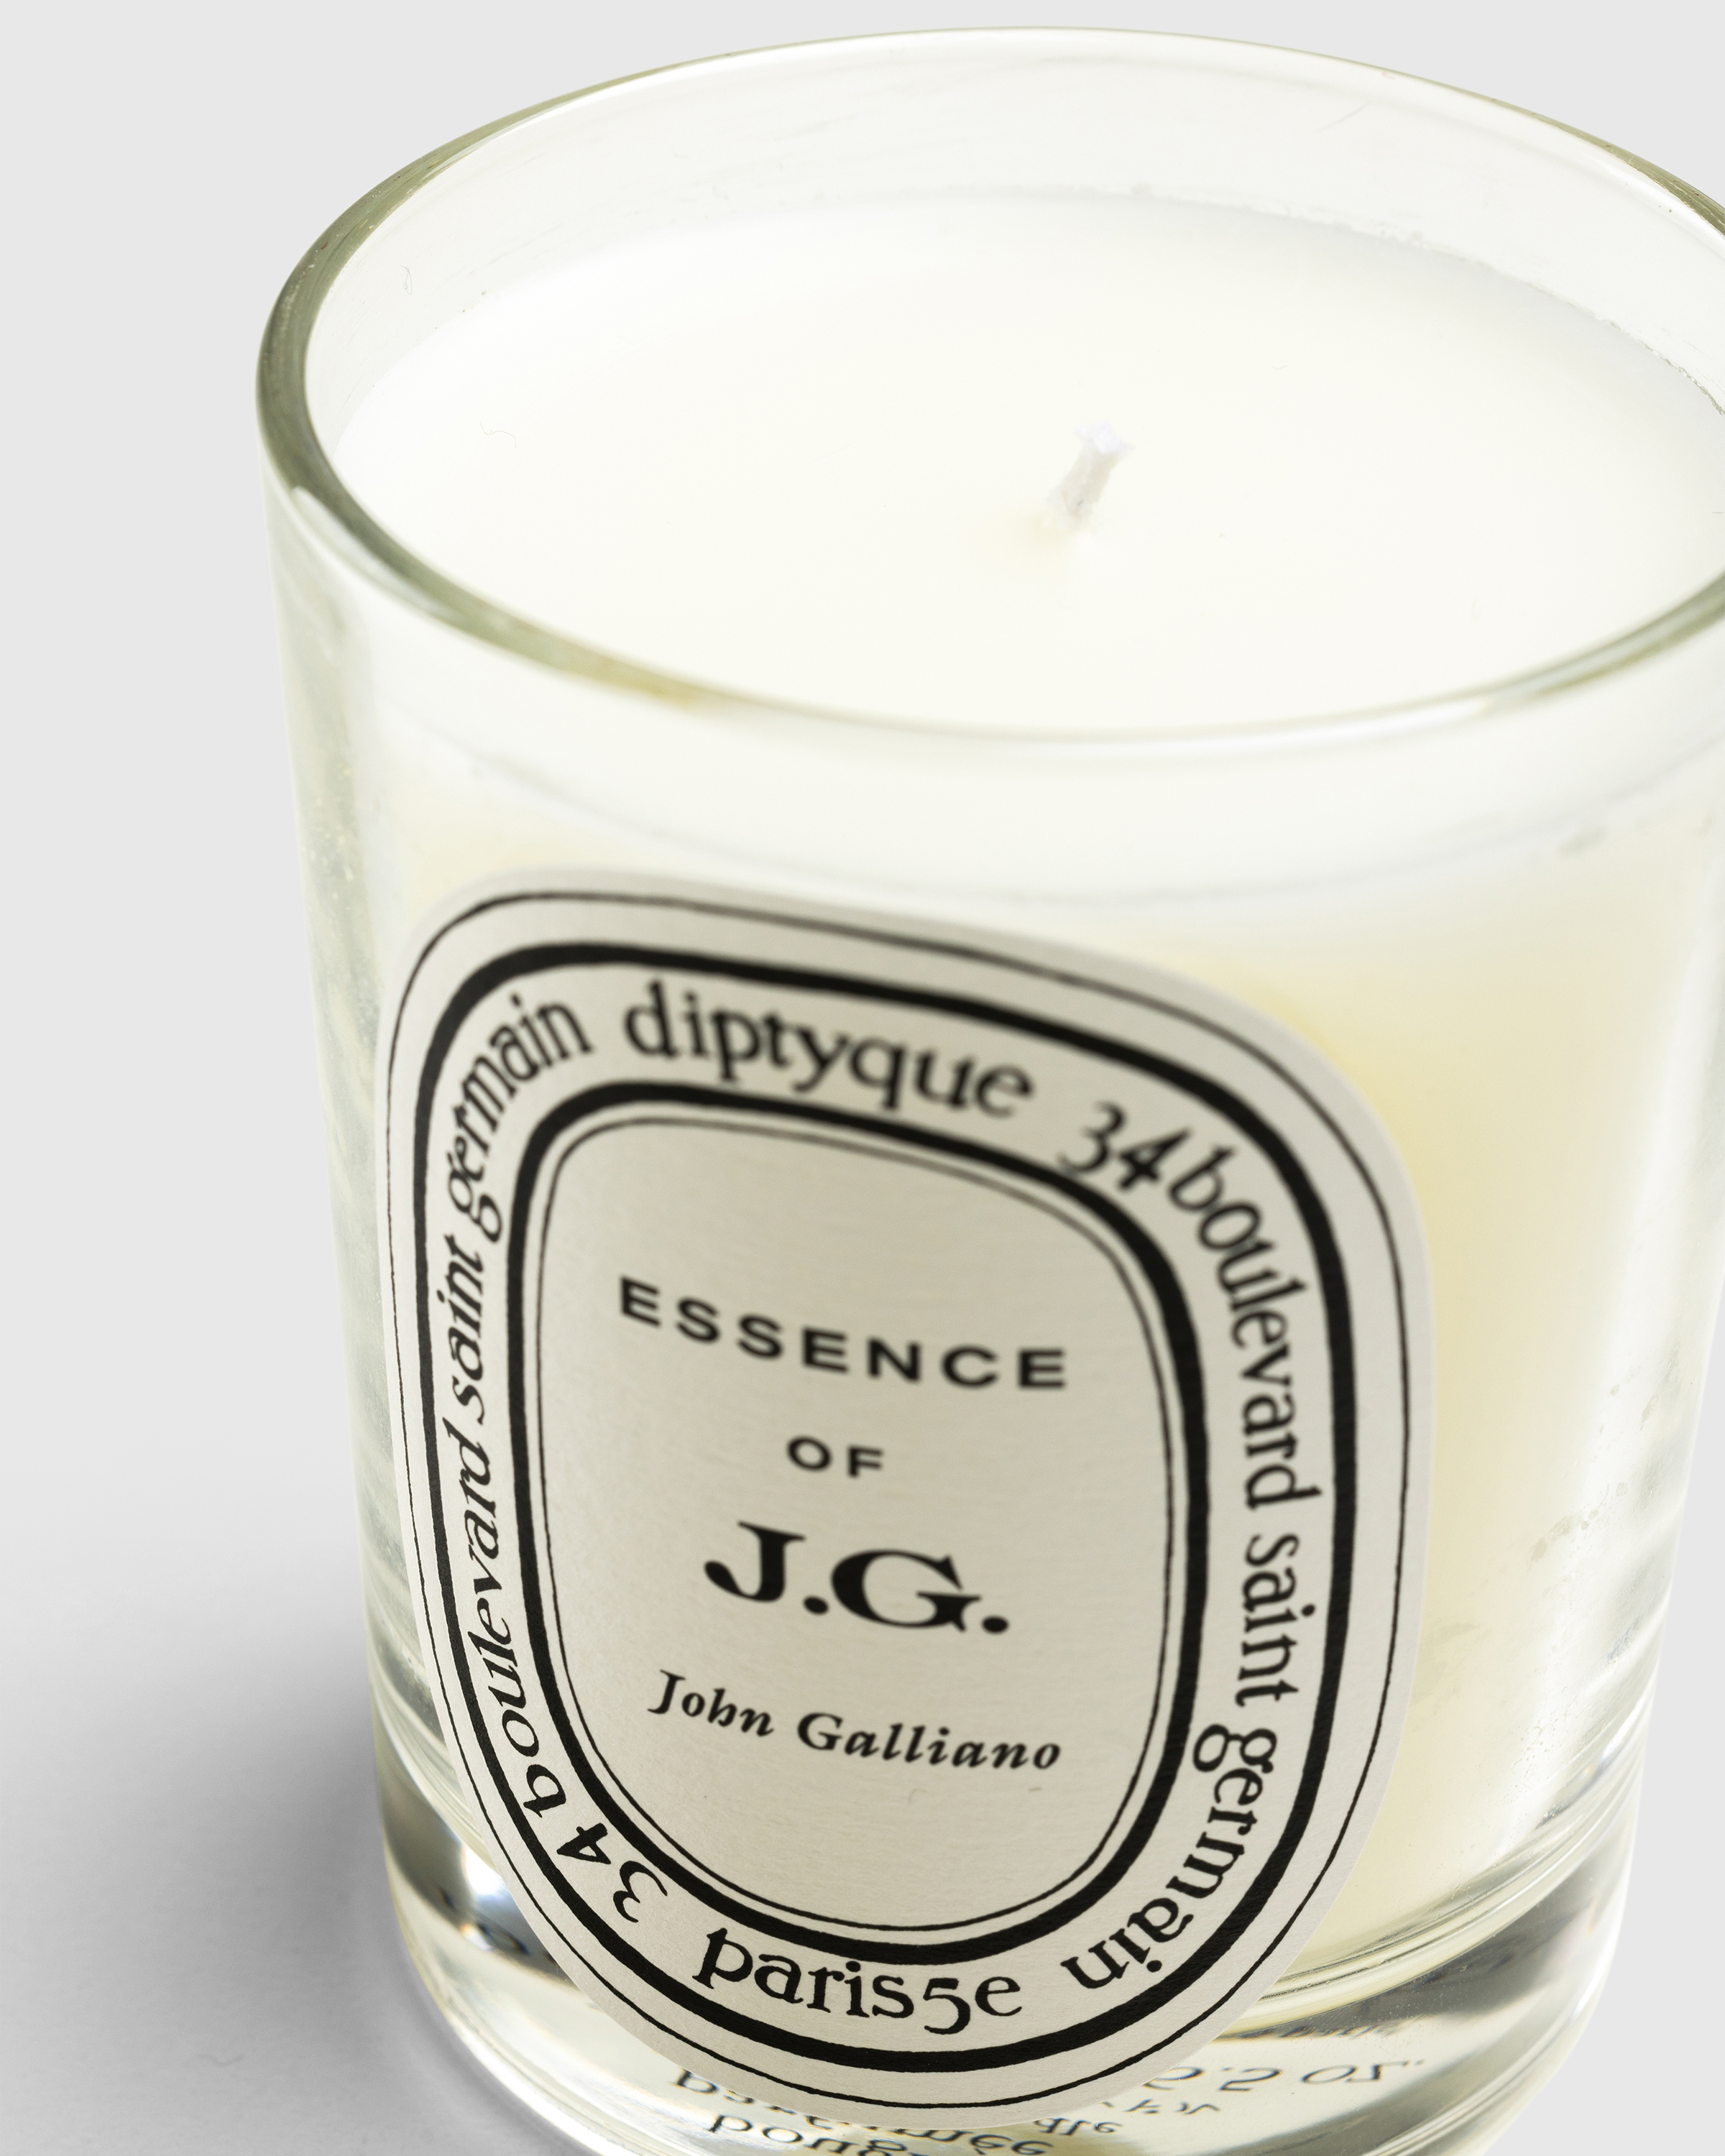 Diptyque – Standard Candle John Galliano 190g - Candles & Fragrances - White - Image 2